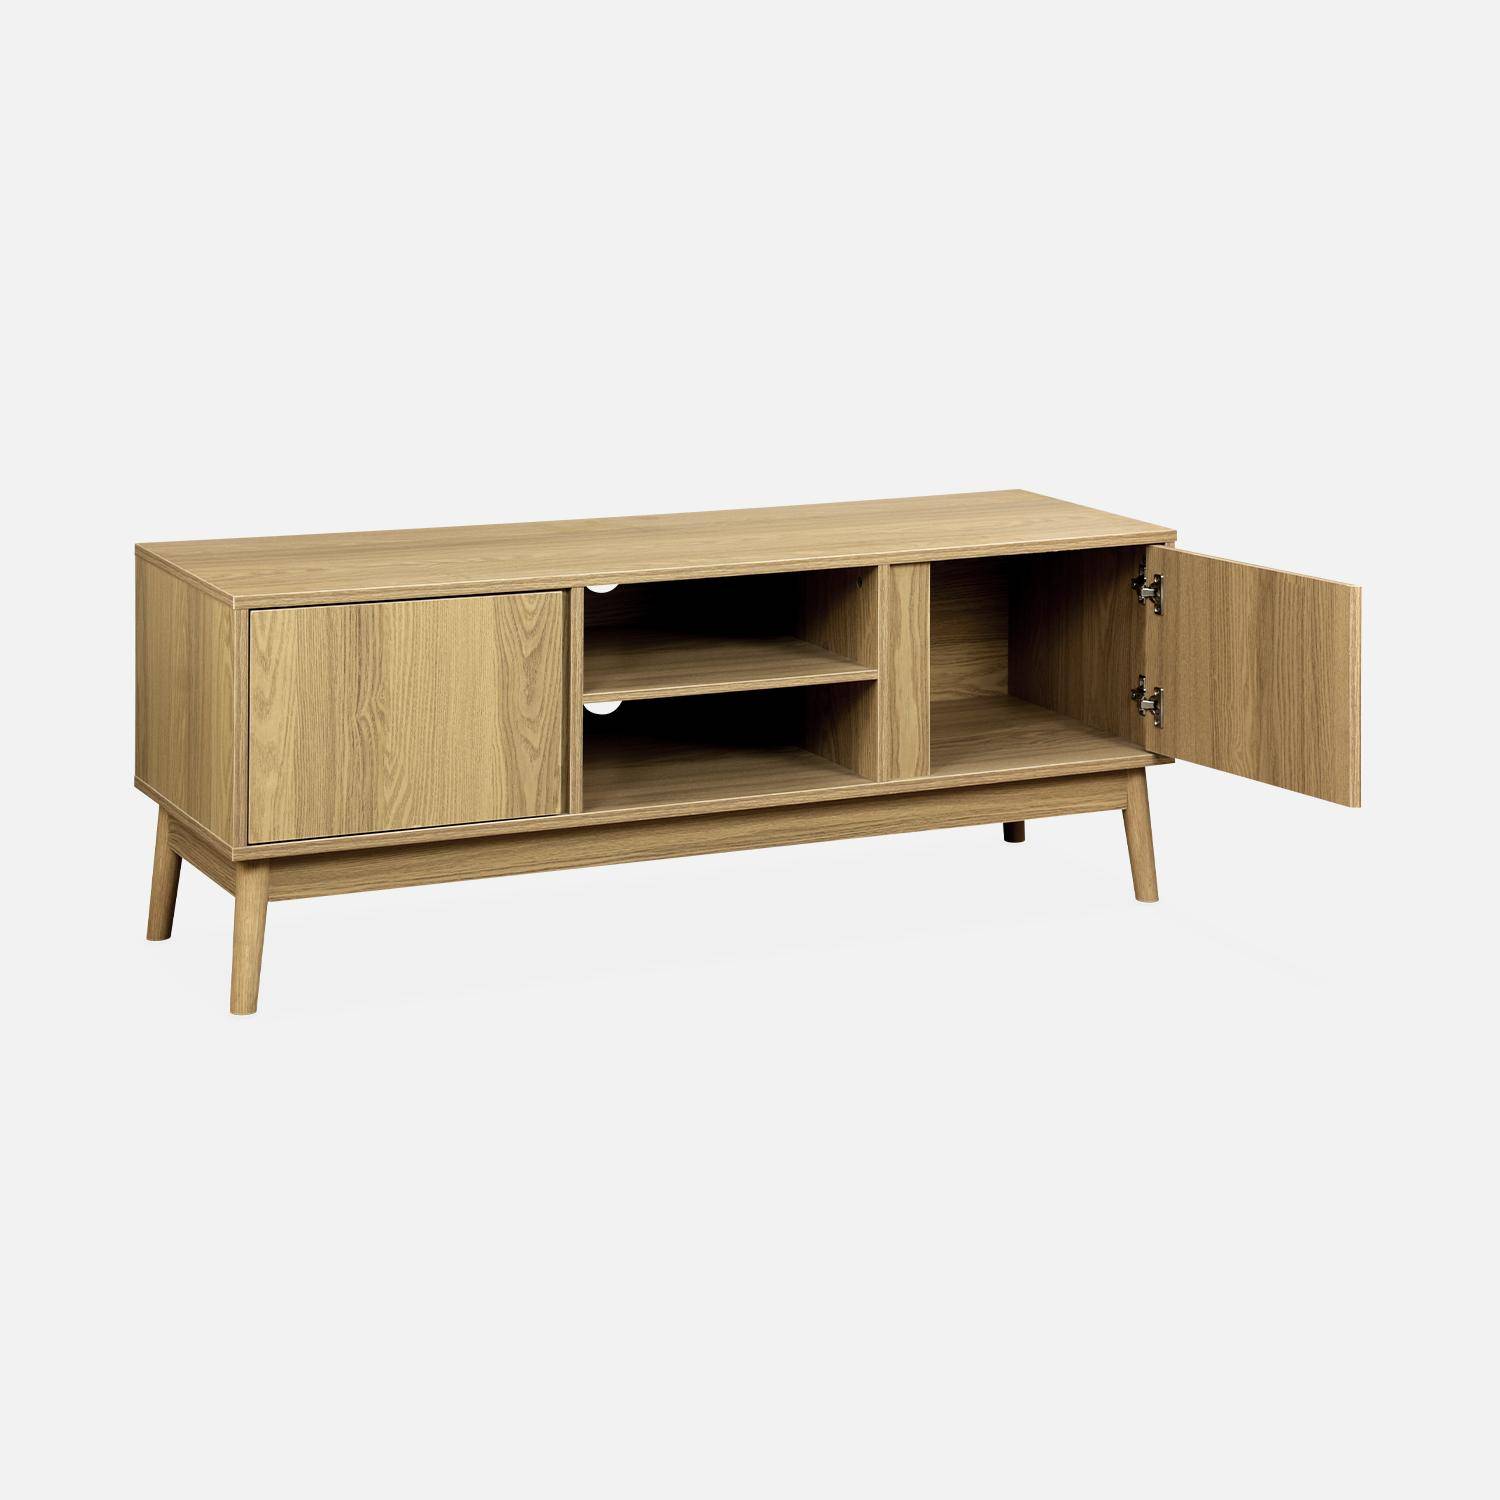 TV stand with 2 doors and 2 storage nooks, 120x39x48cm - Dune - Natural wood Photo5